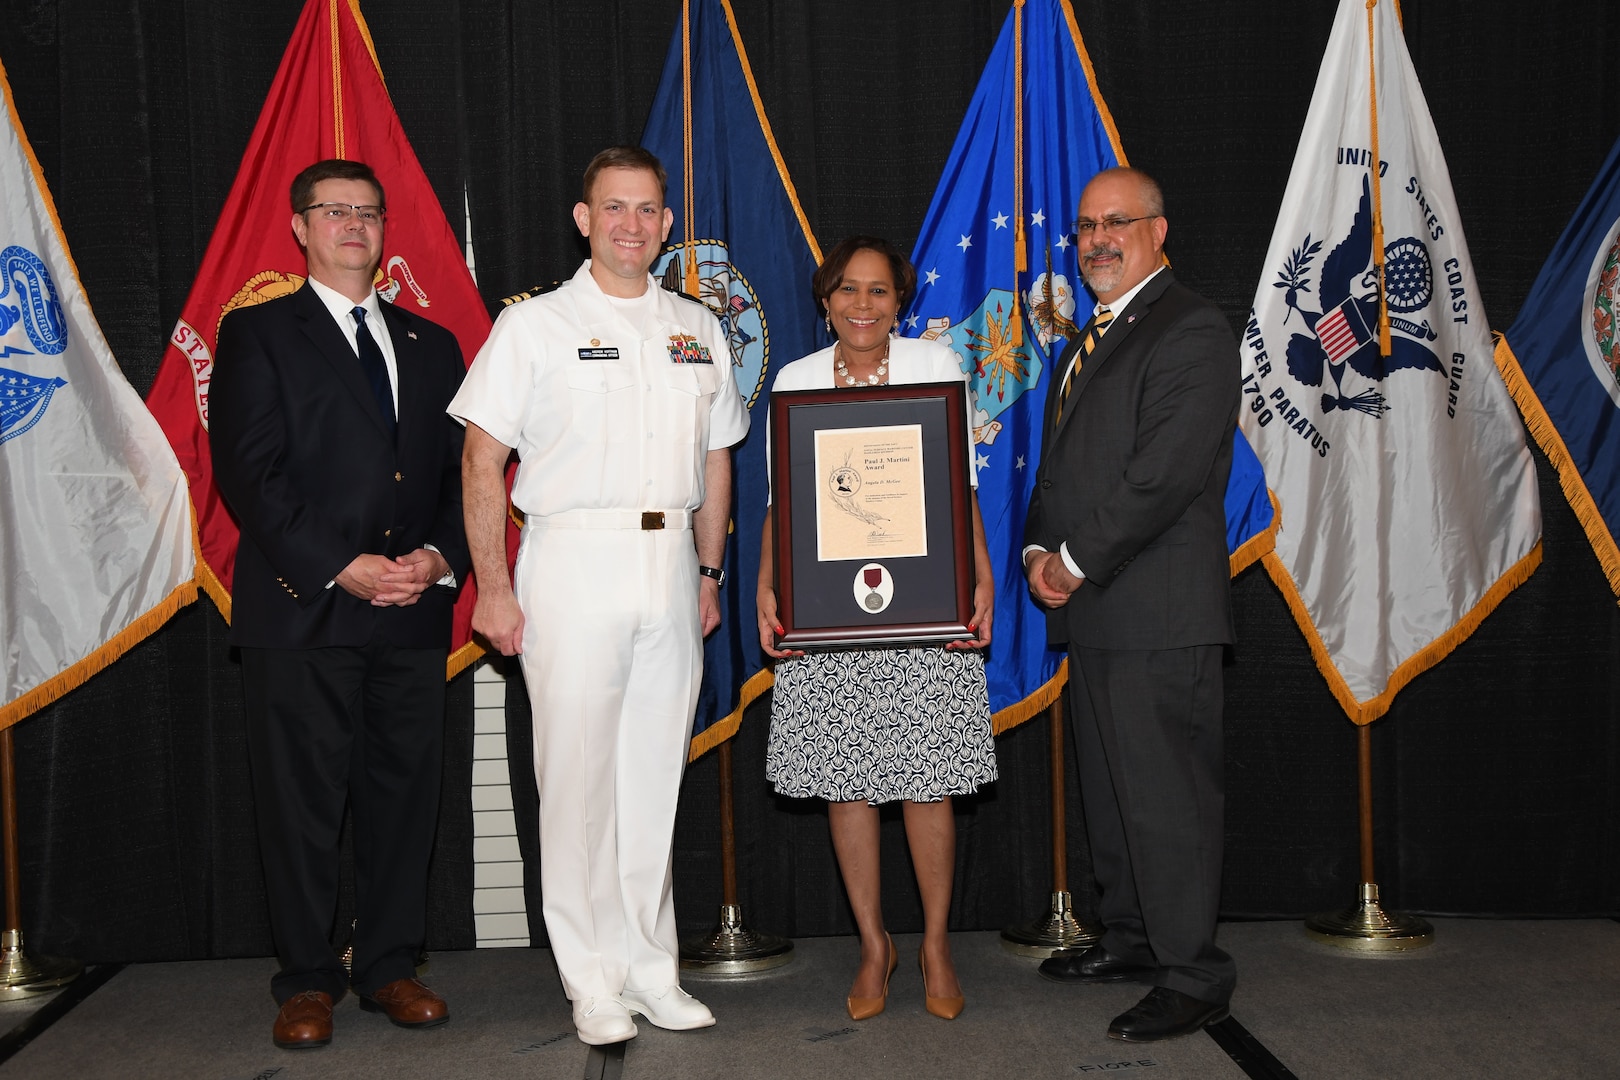 IMAGE: Angela McGee is presented the Paul J. Martini Award at Naval Surface Warfare Center Dahlgren Division's annual awards ceremony, Apr. 26 at the Fredericksburg Expo and Conference Center.

The award is named in honor of Paul J. Martini, who was head of the Engineering Support Directorate of the Naval Ordnance Laboratory from November 1951 to December 1973.